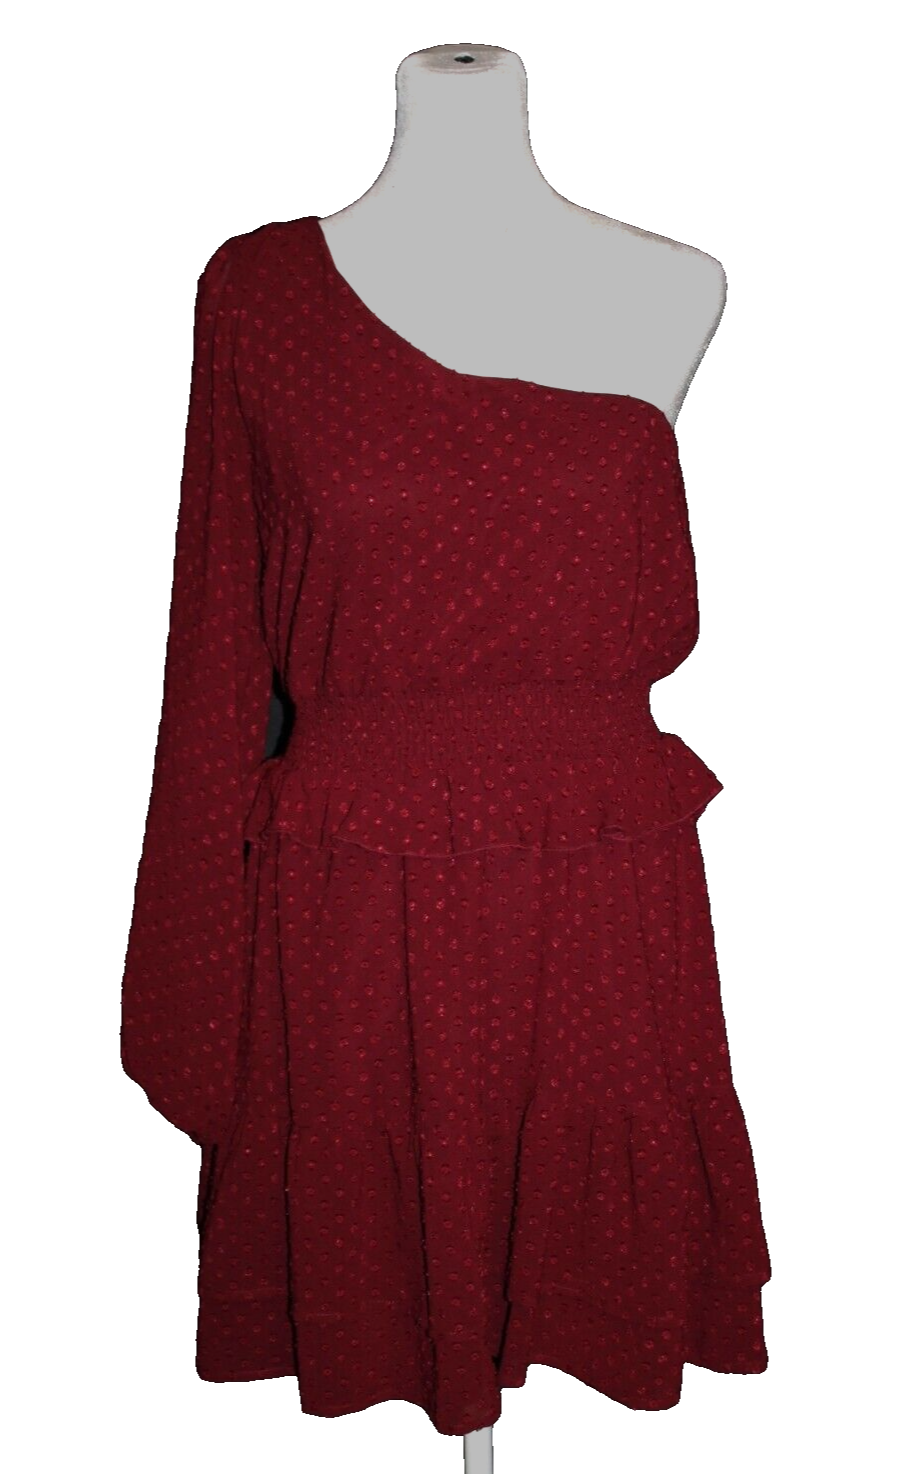 Primary image for Altar'd State Women’s Dress Size Medium M Burgundy Lined Cinched Waist